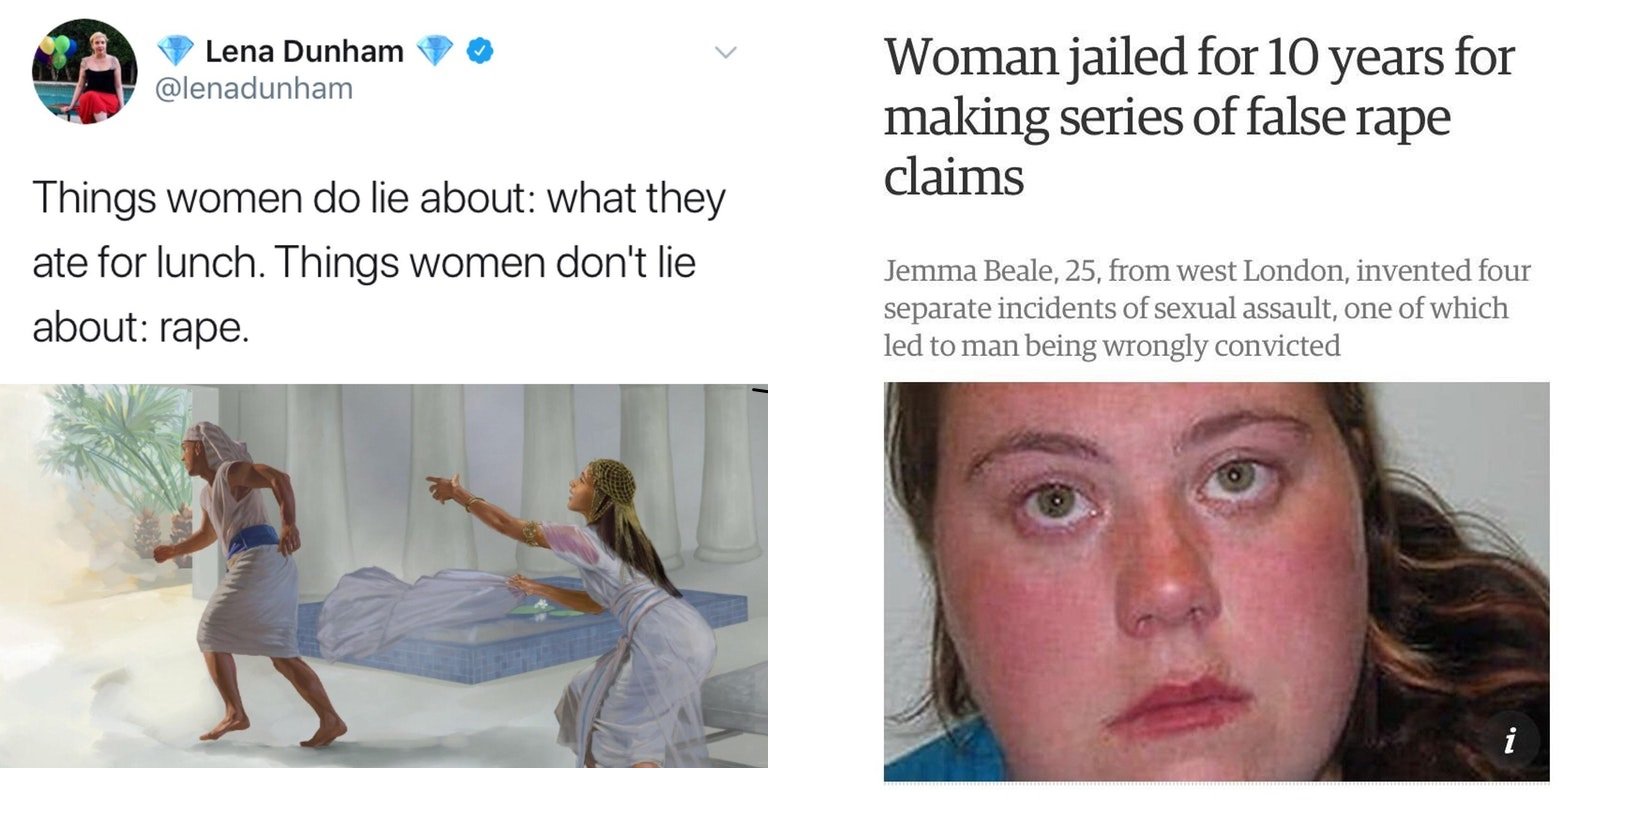 jaw - Lena Dunham Woman jailed for 10 years for making series of false rape claims Things women do lie about what they ate for lunch. Things women don't lie about rape. Jemma Beale, 25, from west London, invented four separate incidents of sexual assault,